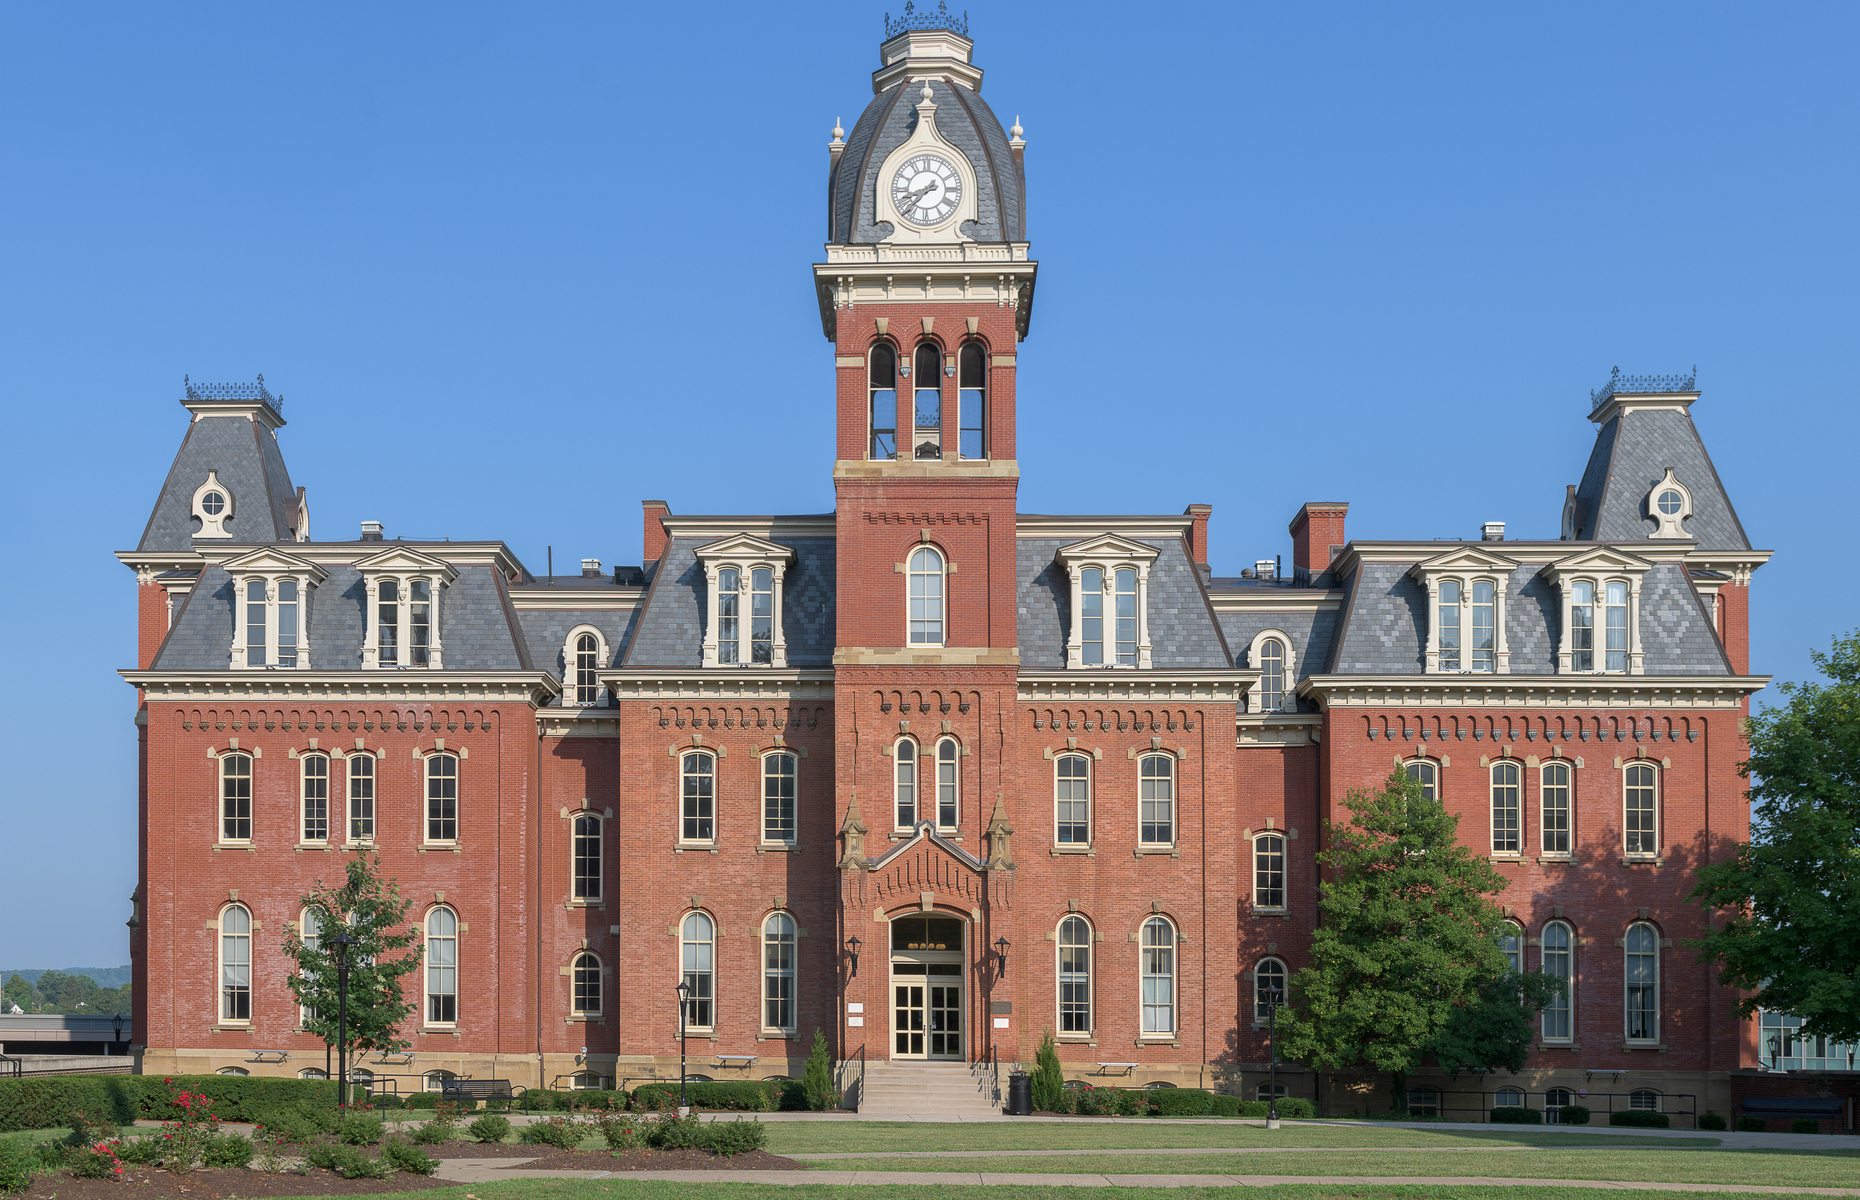 <p>The clock tower, slate mansard roof, arched dormer windows, and red brick are all iconic features of Woodburn Hall (pictured), the gorgeous Second Empire–style building on <a href="https://www.wvu.edu/" rel="noreferrer noopener">West Virginia University</a>’s Morgantown campus. The Hall is one of three buildings on Woodburn Circle, listed on the National Register of Historic Places.</p>